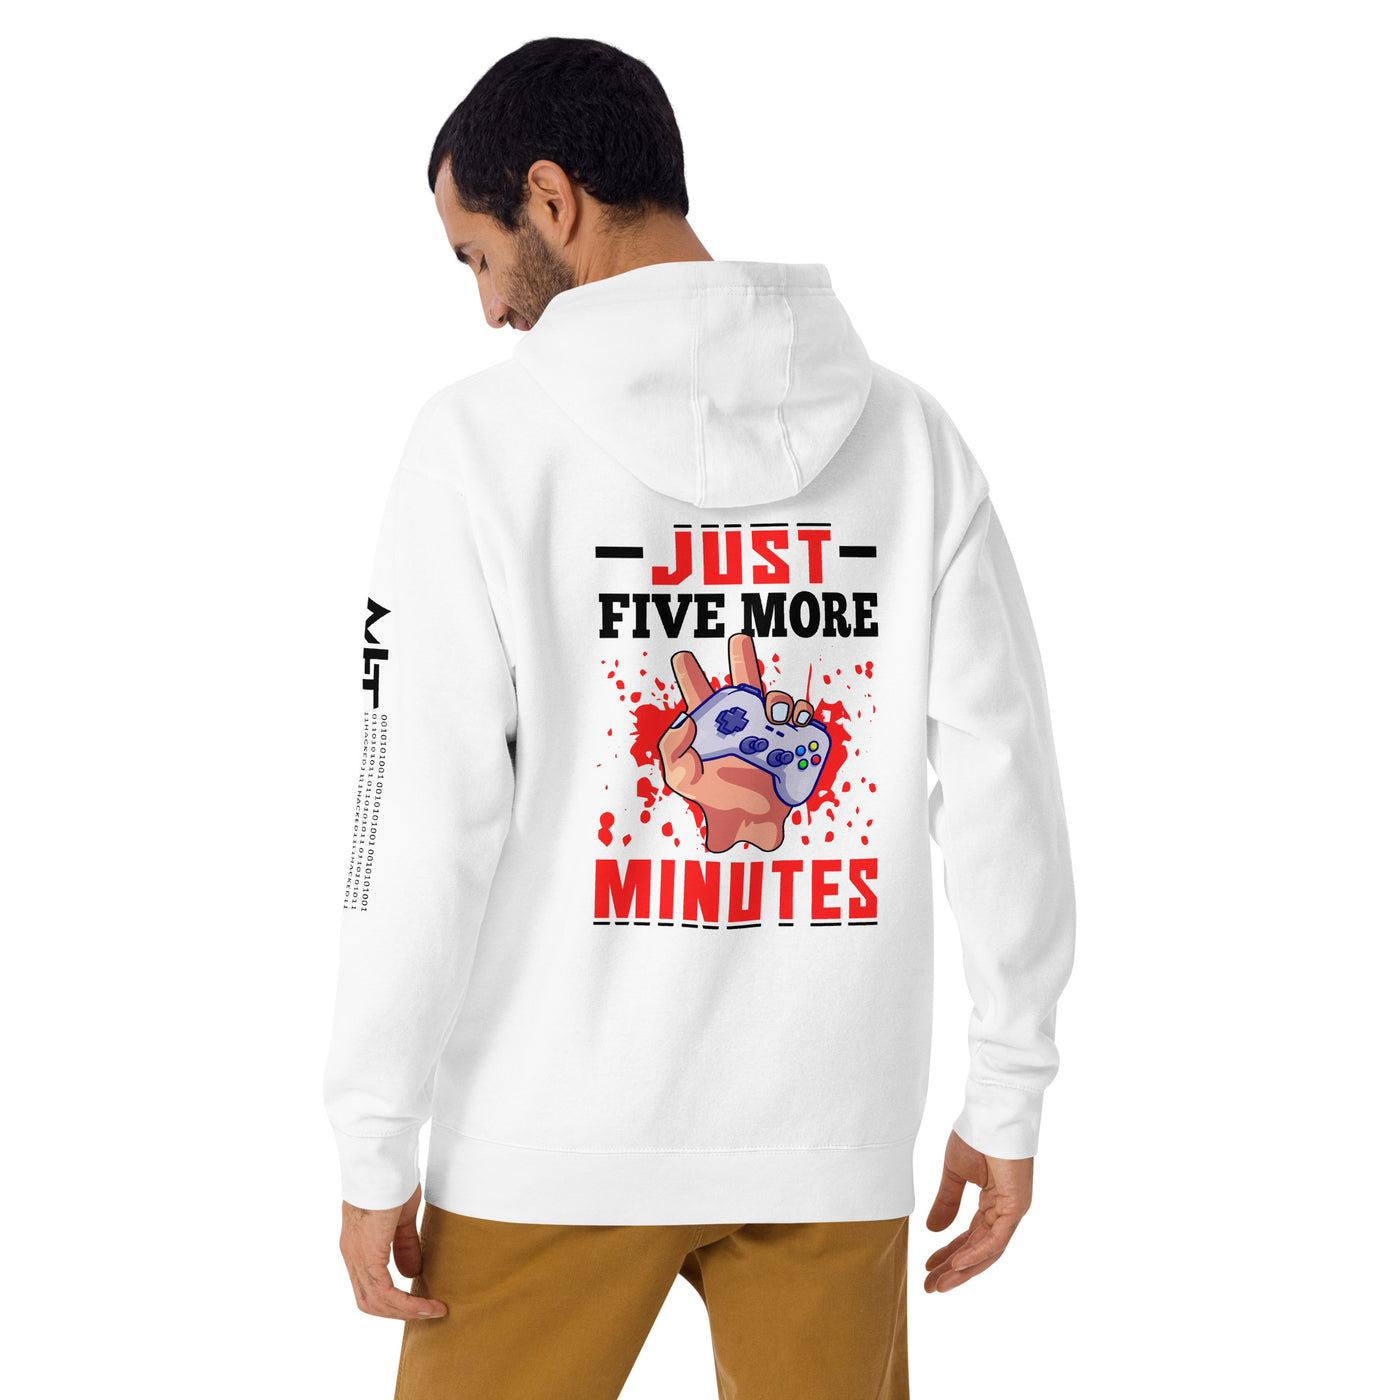 Just 5 more Minutes Rima in Dark Text - Unisex Hoodie ( Back Print )